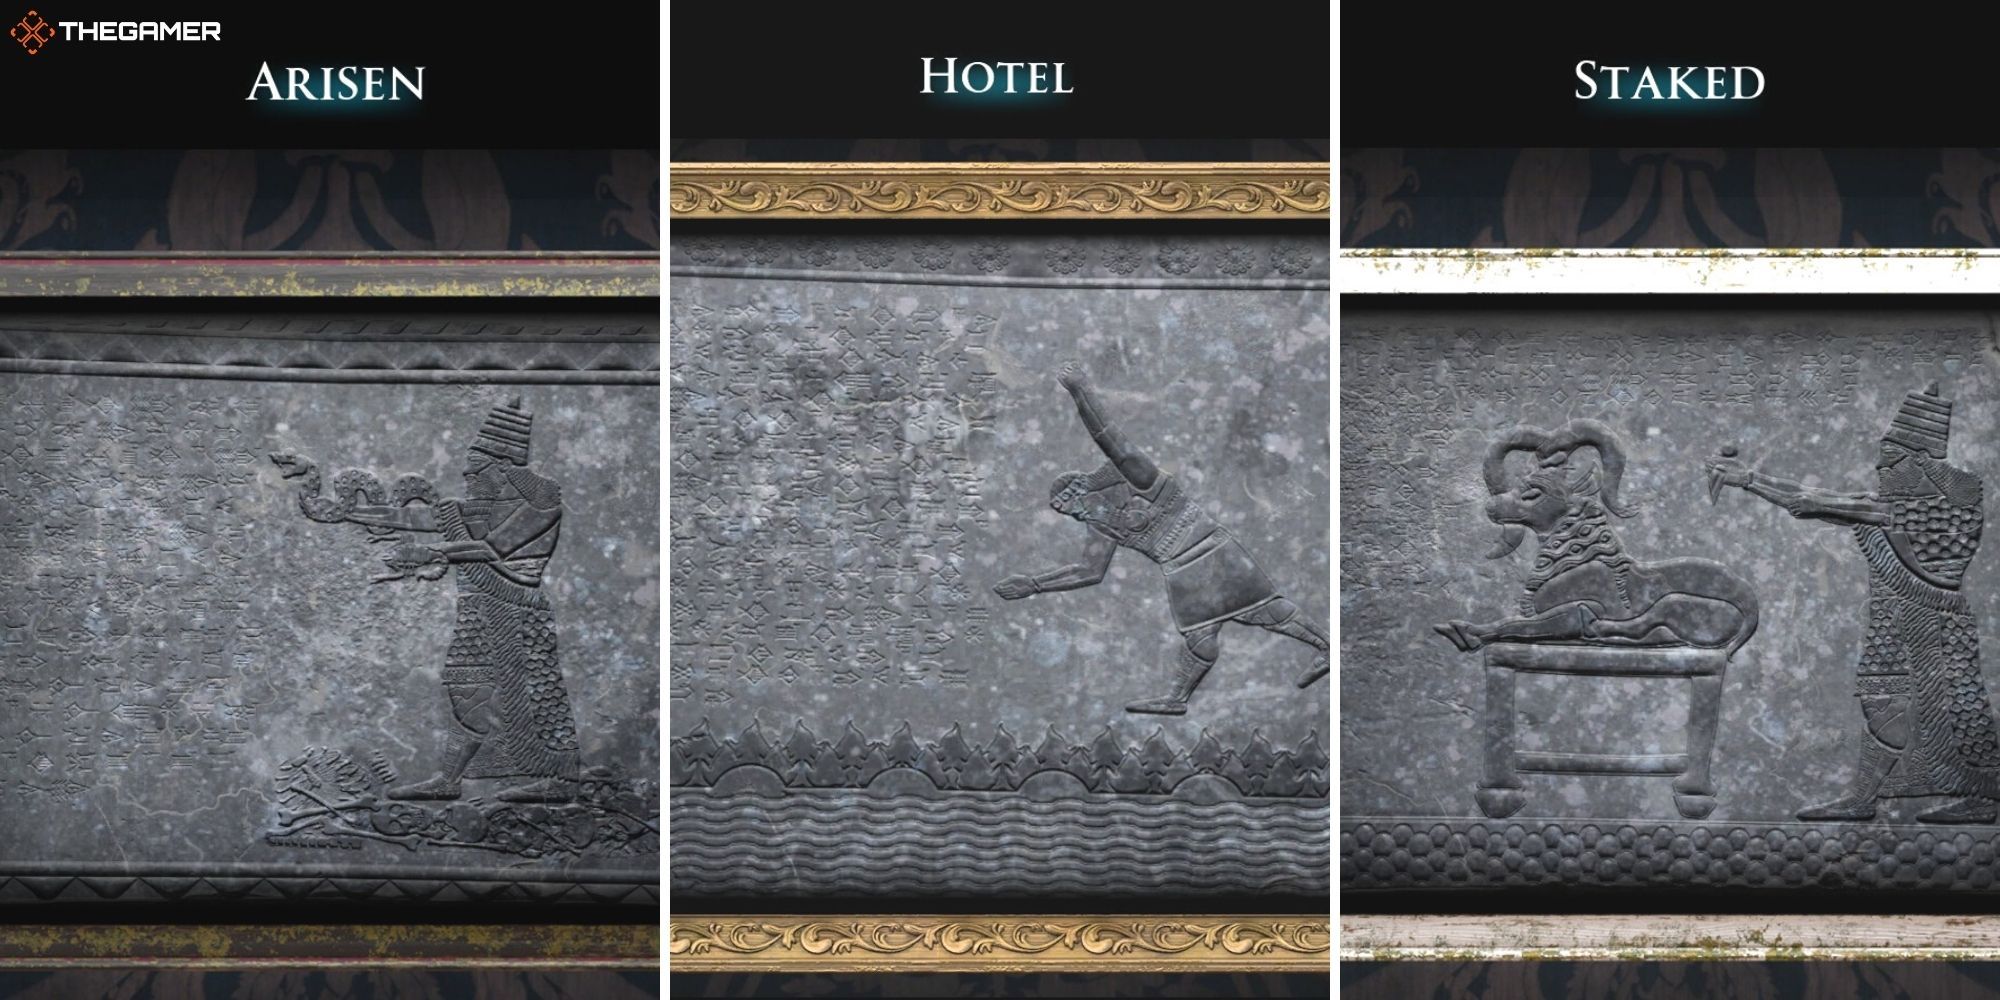 House of Ashes - split image of pictures - Arisen on left, Hotel in centre, Staked on right